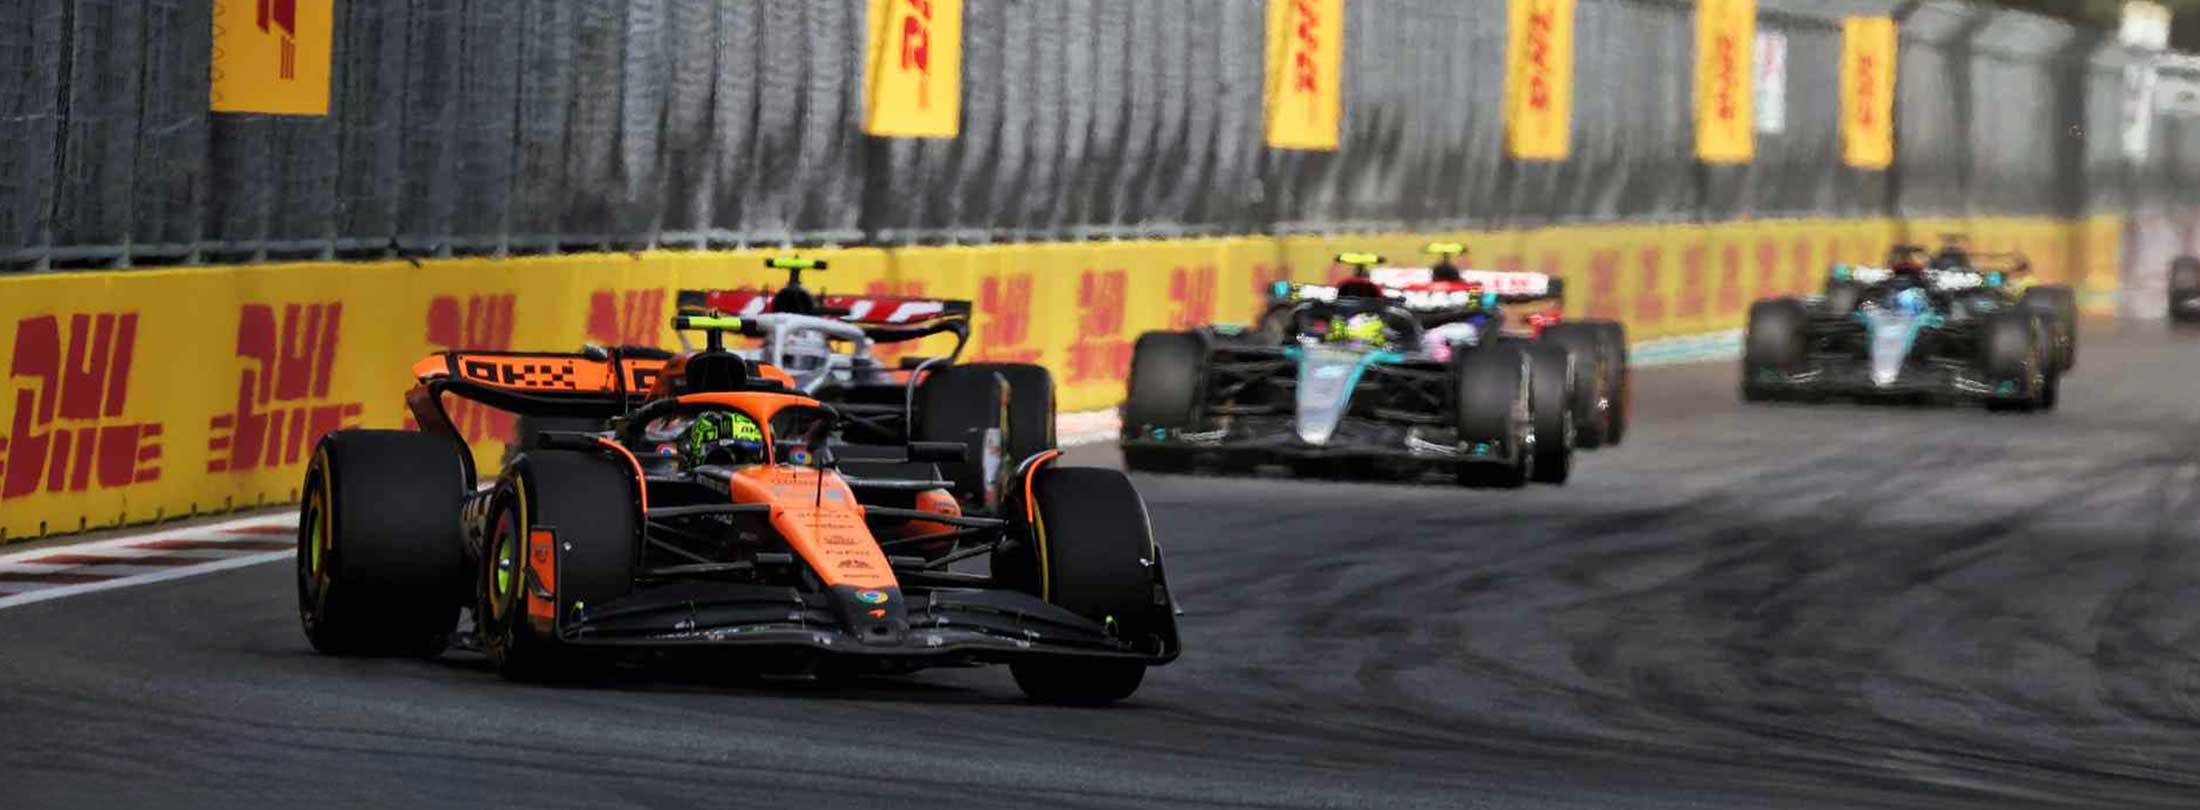 F1 Heats Up Miami with Action-Packed Grand Prix